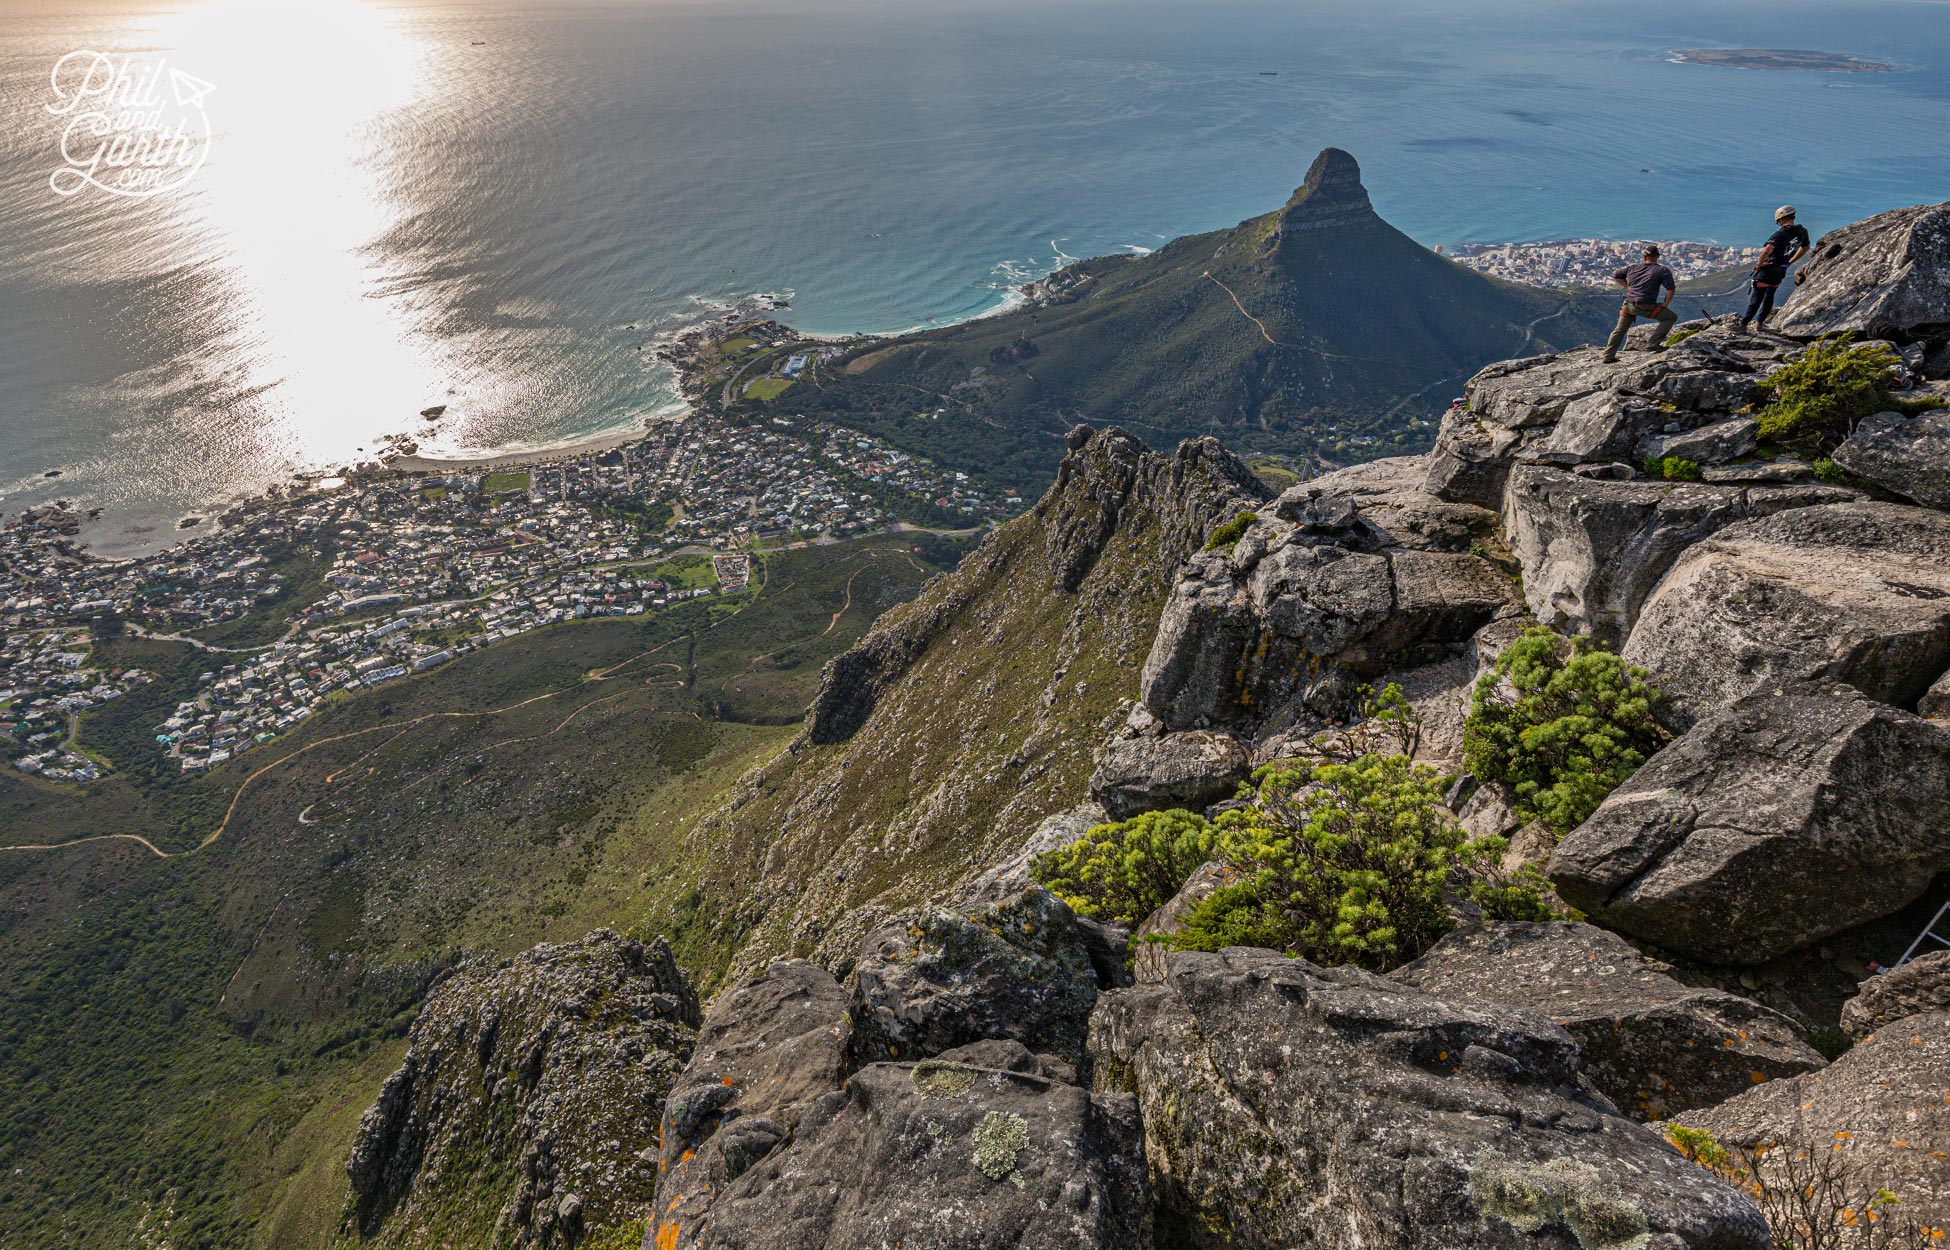 View of the famous Lions Head mountain